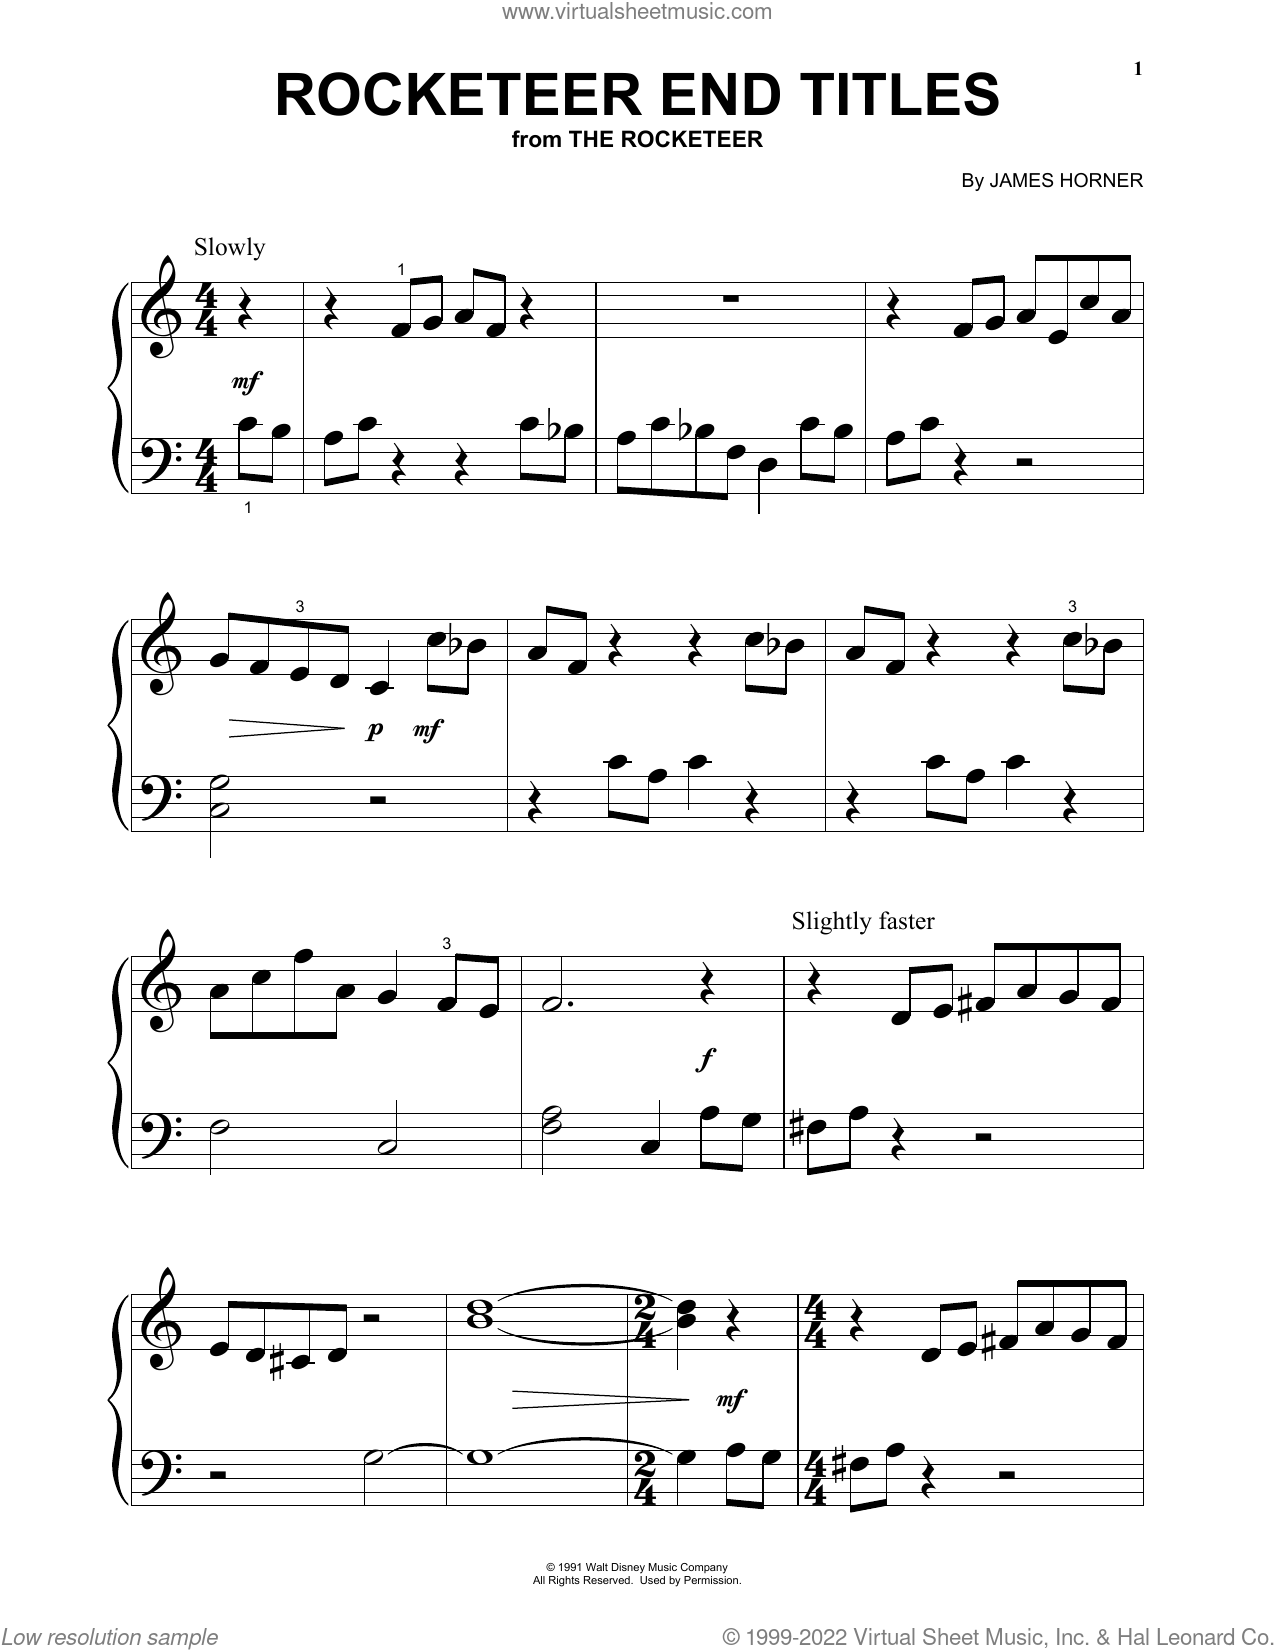 Legends of the Fall Sheet music for Violin (Solo)